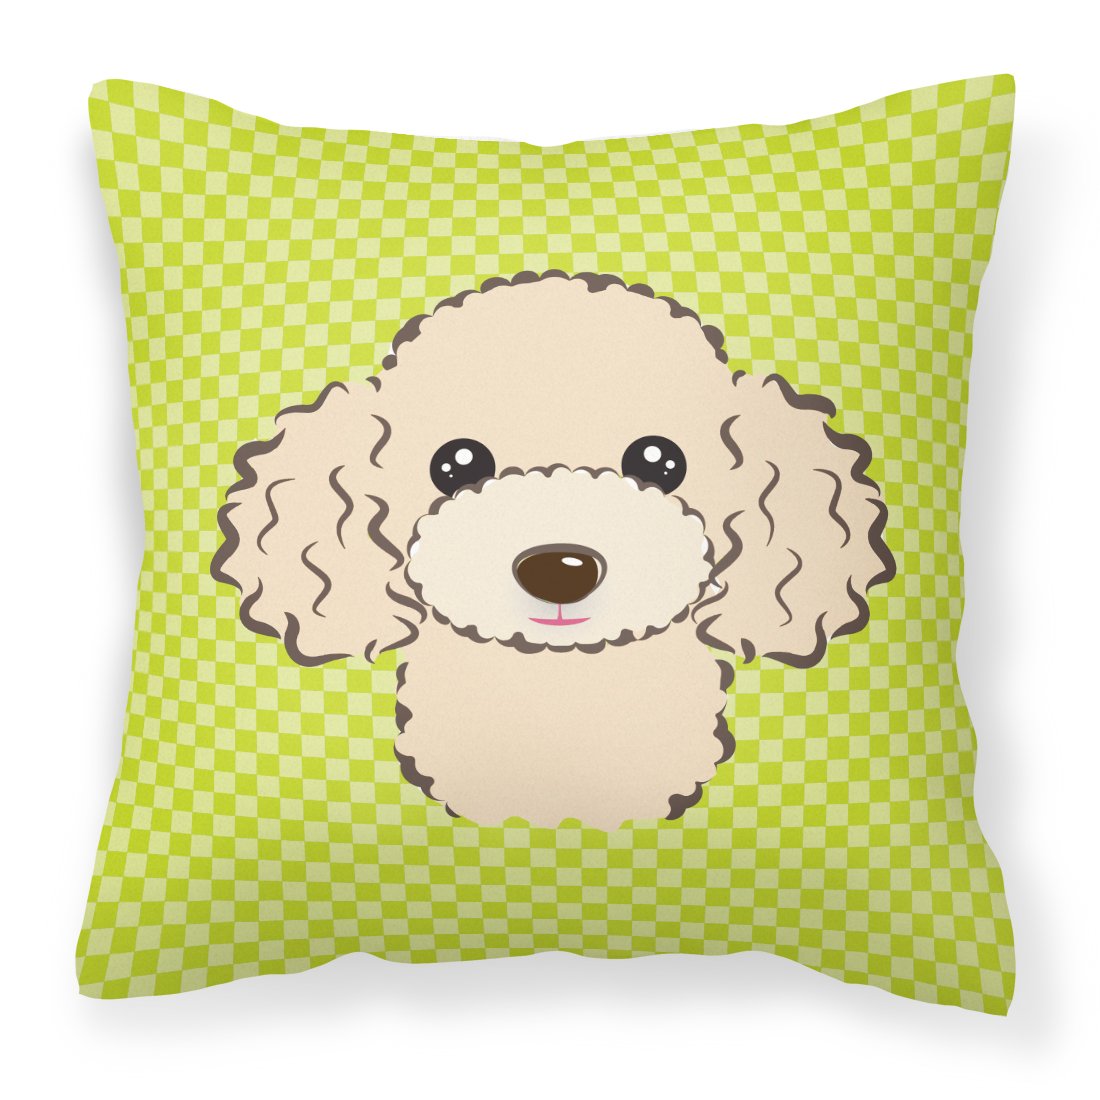 Checkerboard Lime Green Buff Poodle Canvas Fabric Decorative Pillow by Caroline's Treasures